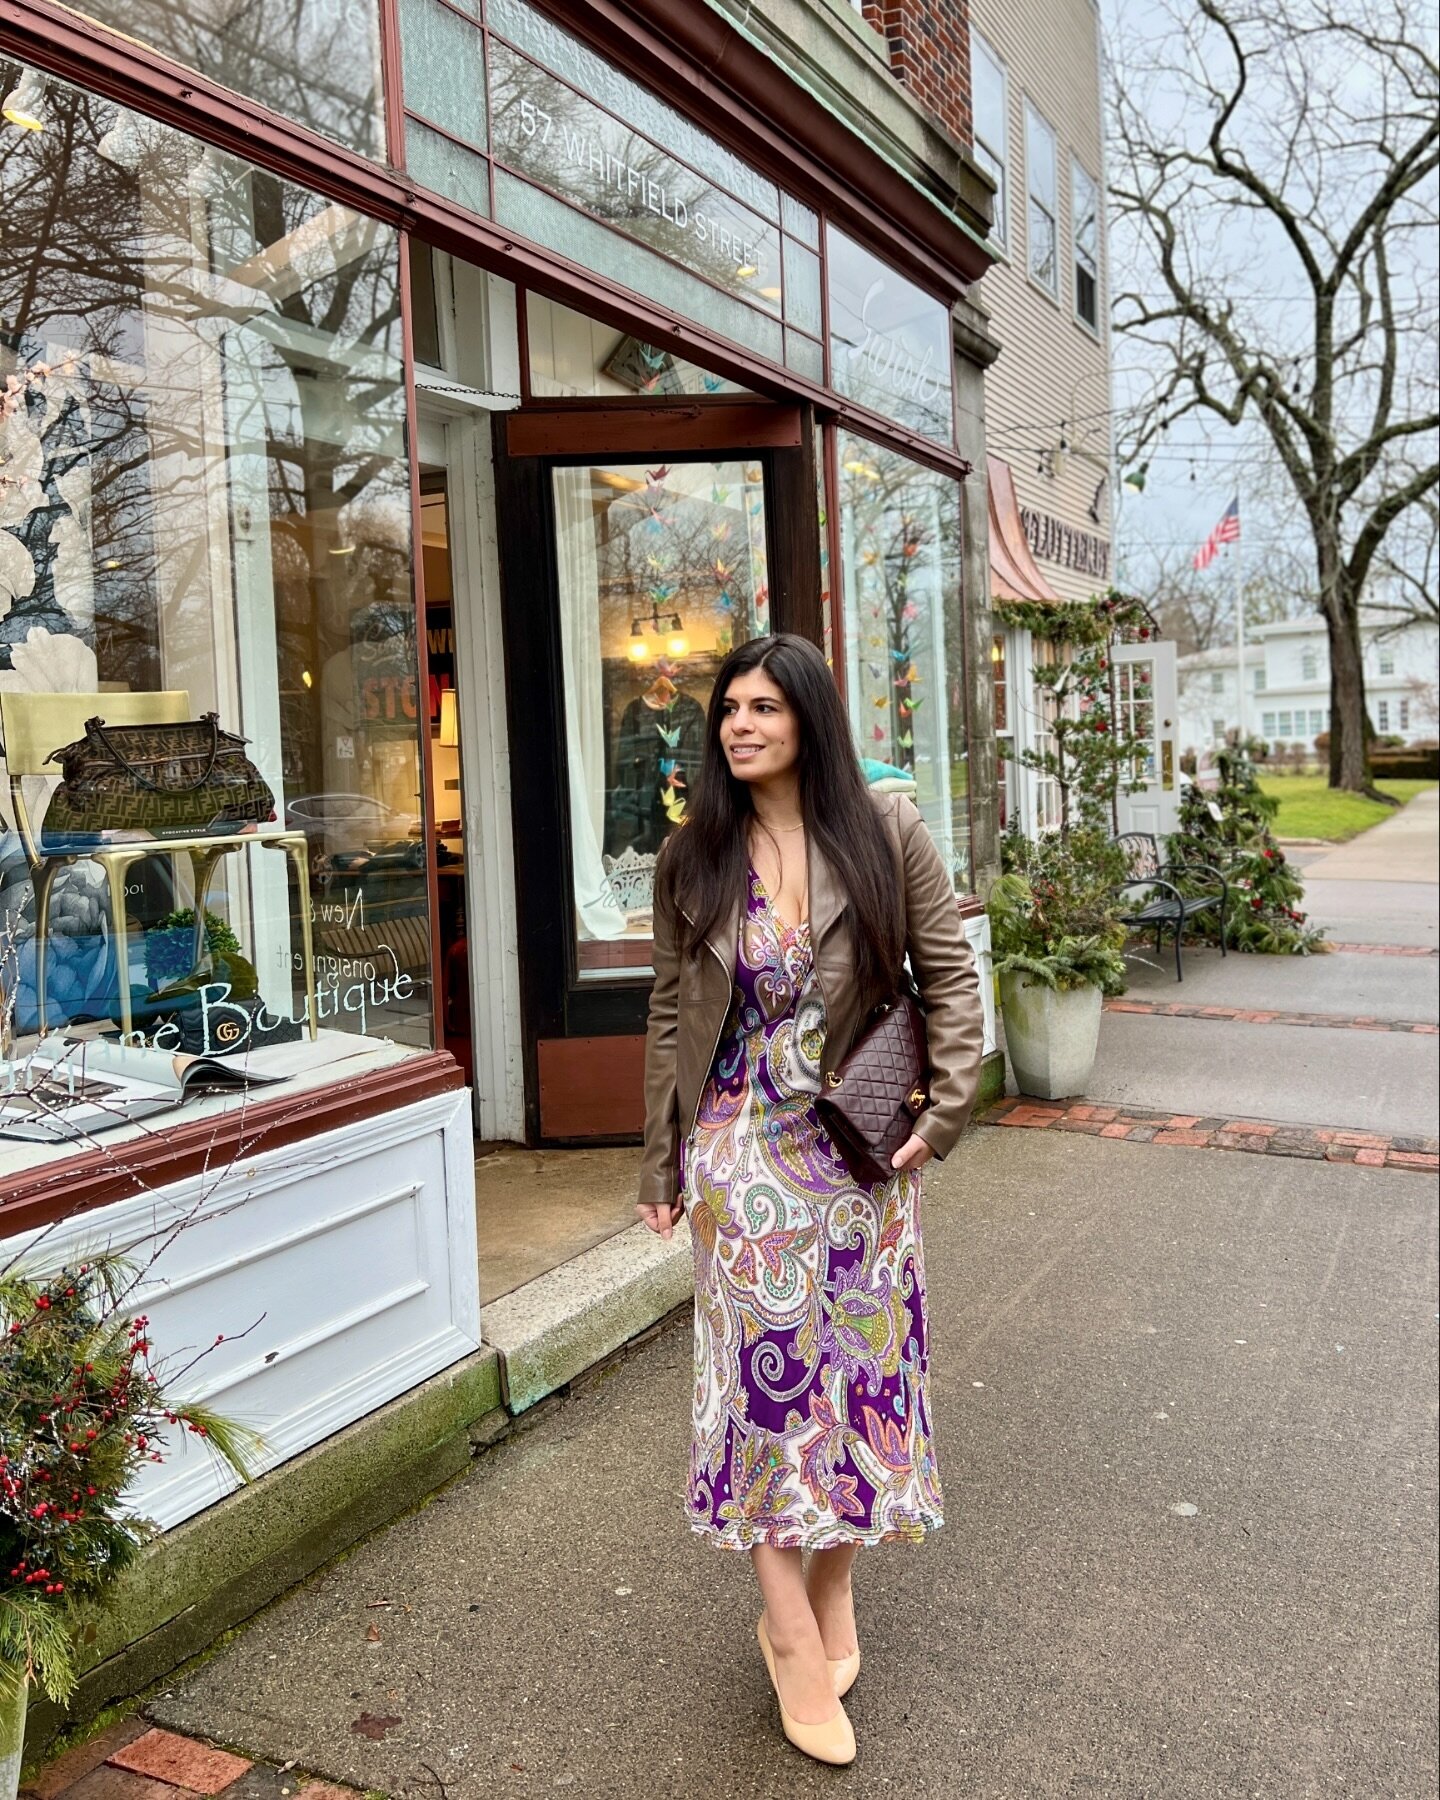 Getting ready for that promise of an early spring!

Etro Dress
Tahari Leather Jacket 
Ann Taylor Pumps

DM on instagram for info!
.
.
.
#shopsmall #shoplocal #Connecticut #shopconsignment #guilfordct #womenownedbusiness #marijaneboutique #connecticut